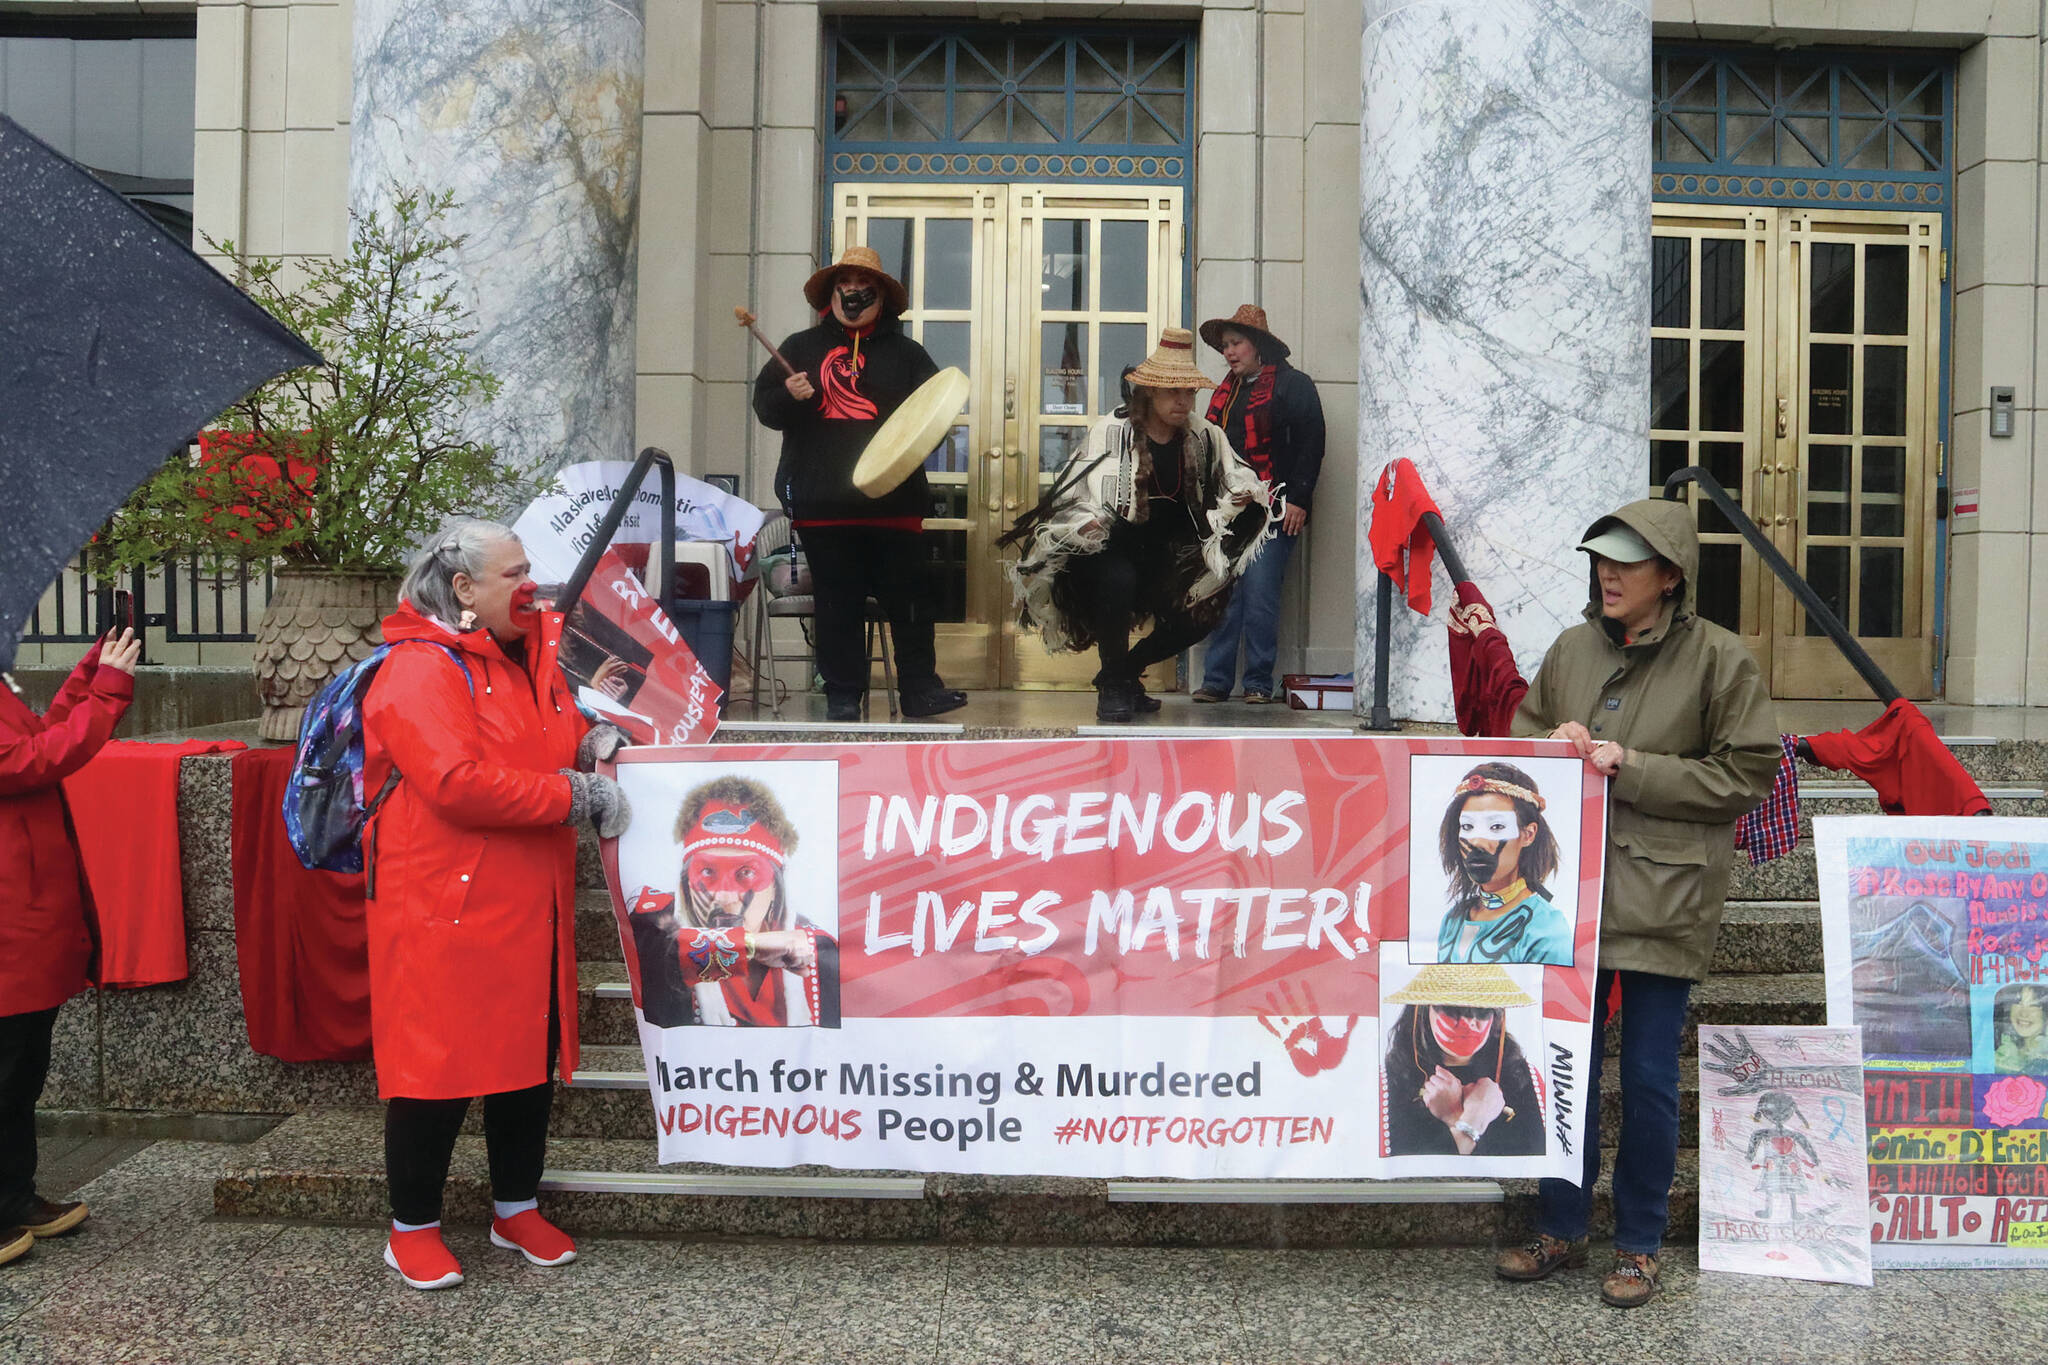 Mark Sabbatini / Juneau Empire
Advocates on behalf of missing and murdered Indigenous persons hold a banner and perform a opening song during a rally in front of the Alaska State Capitol on Sunday to commemorate the annual Missing and Murdered Indigenous Persons Awareness Day.